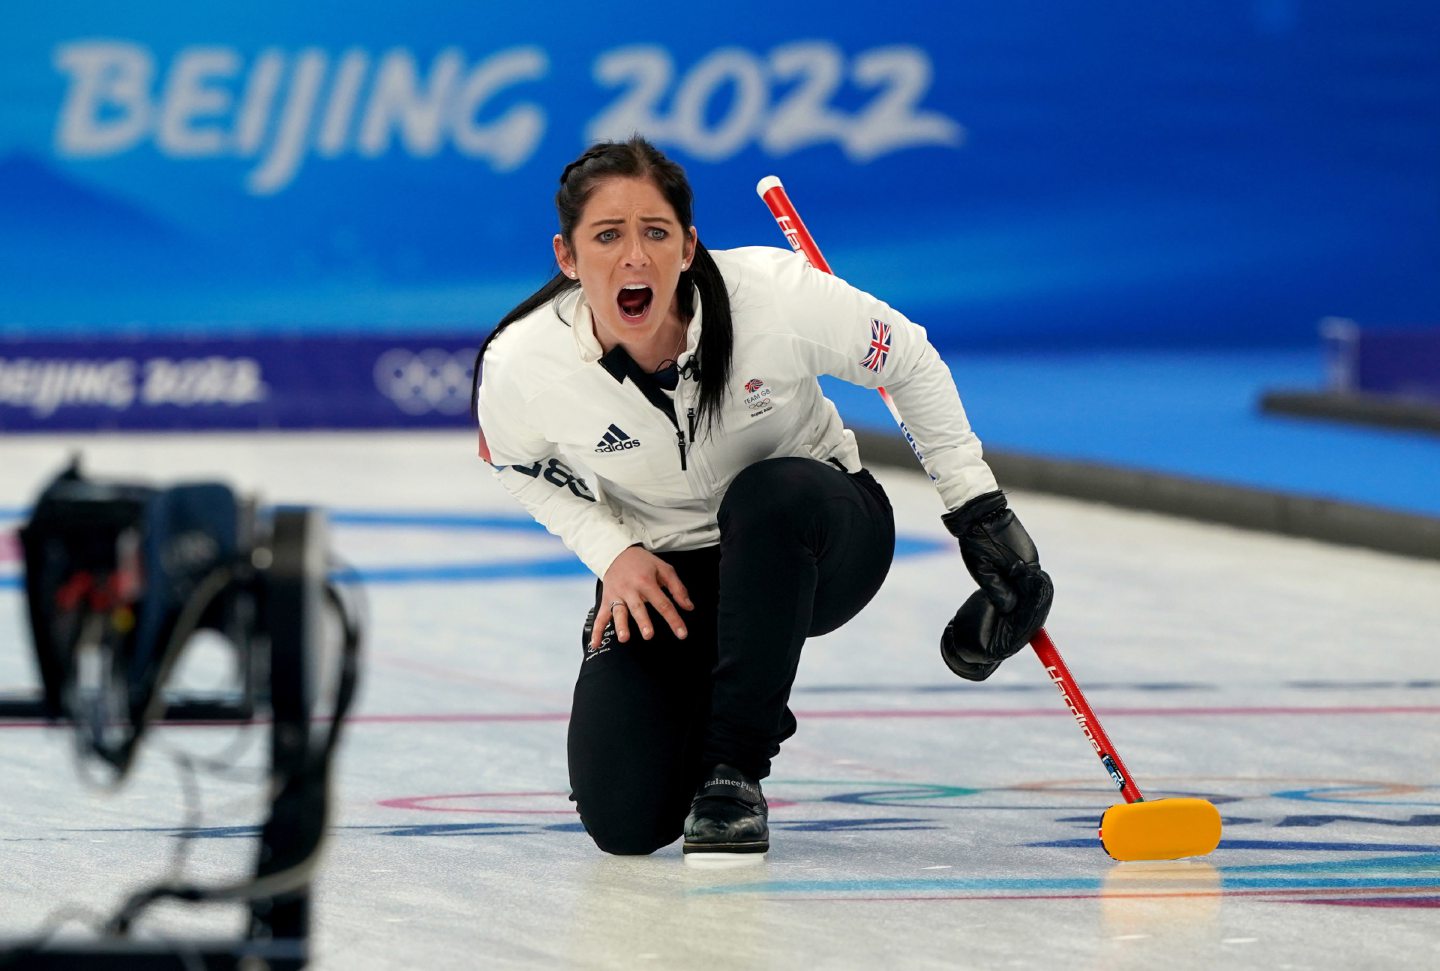 Great Britain's Eve Muirhead is inspiring the next generation of curlers in Scotland.